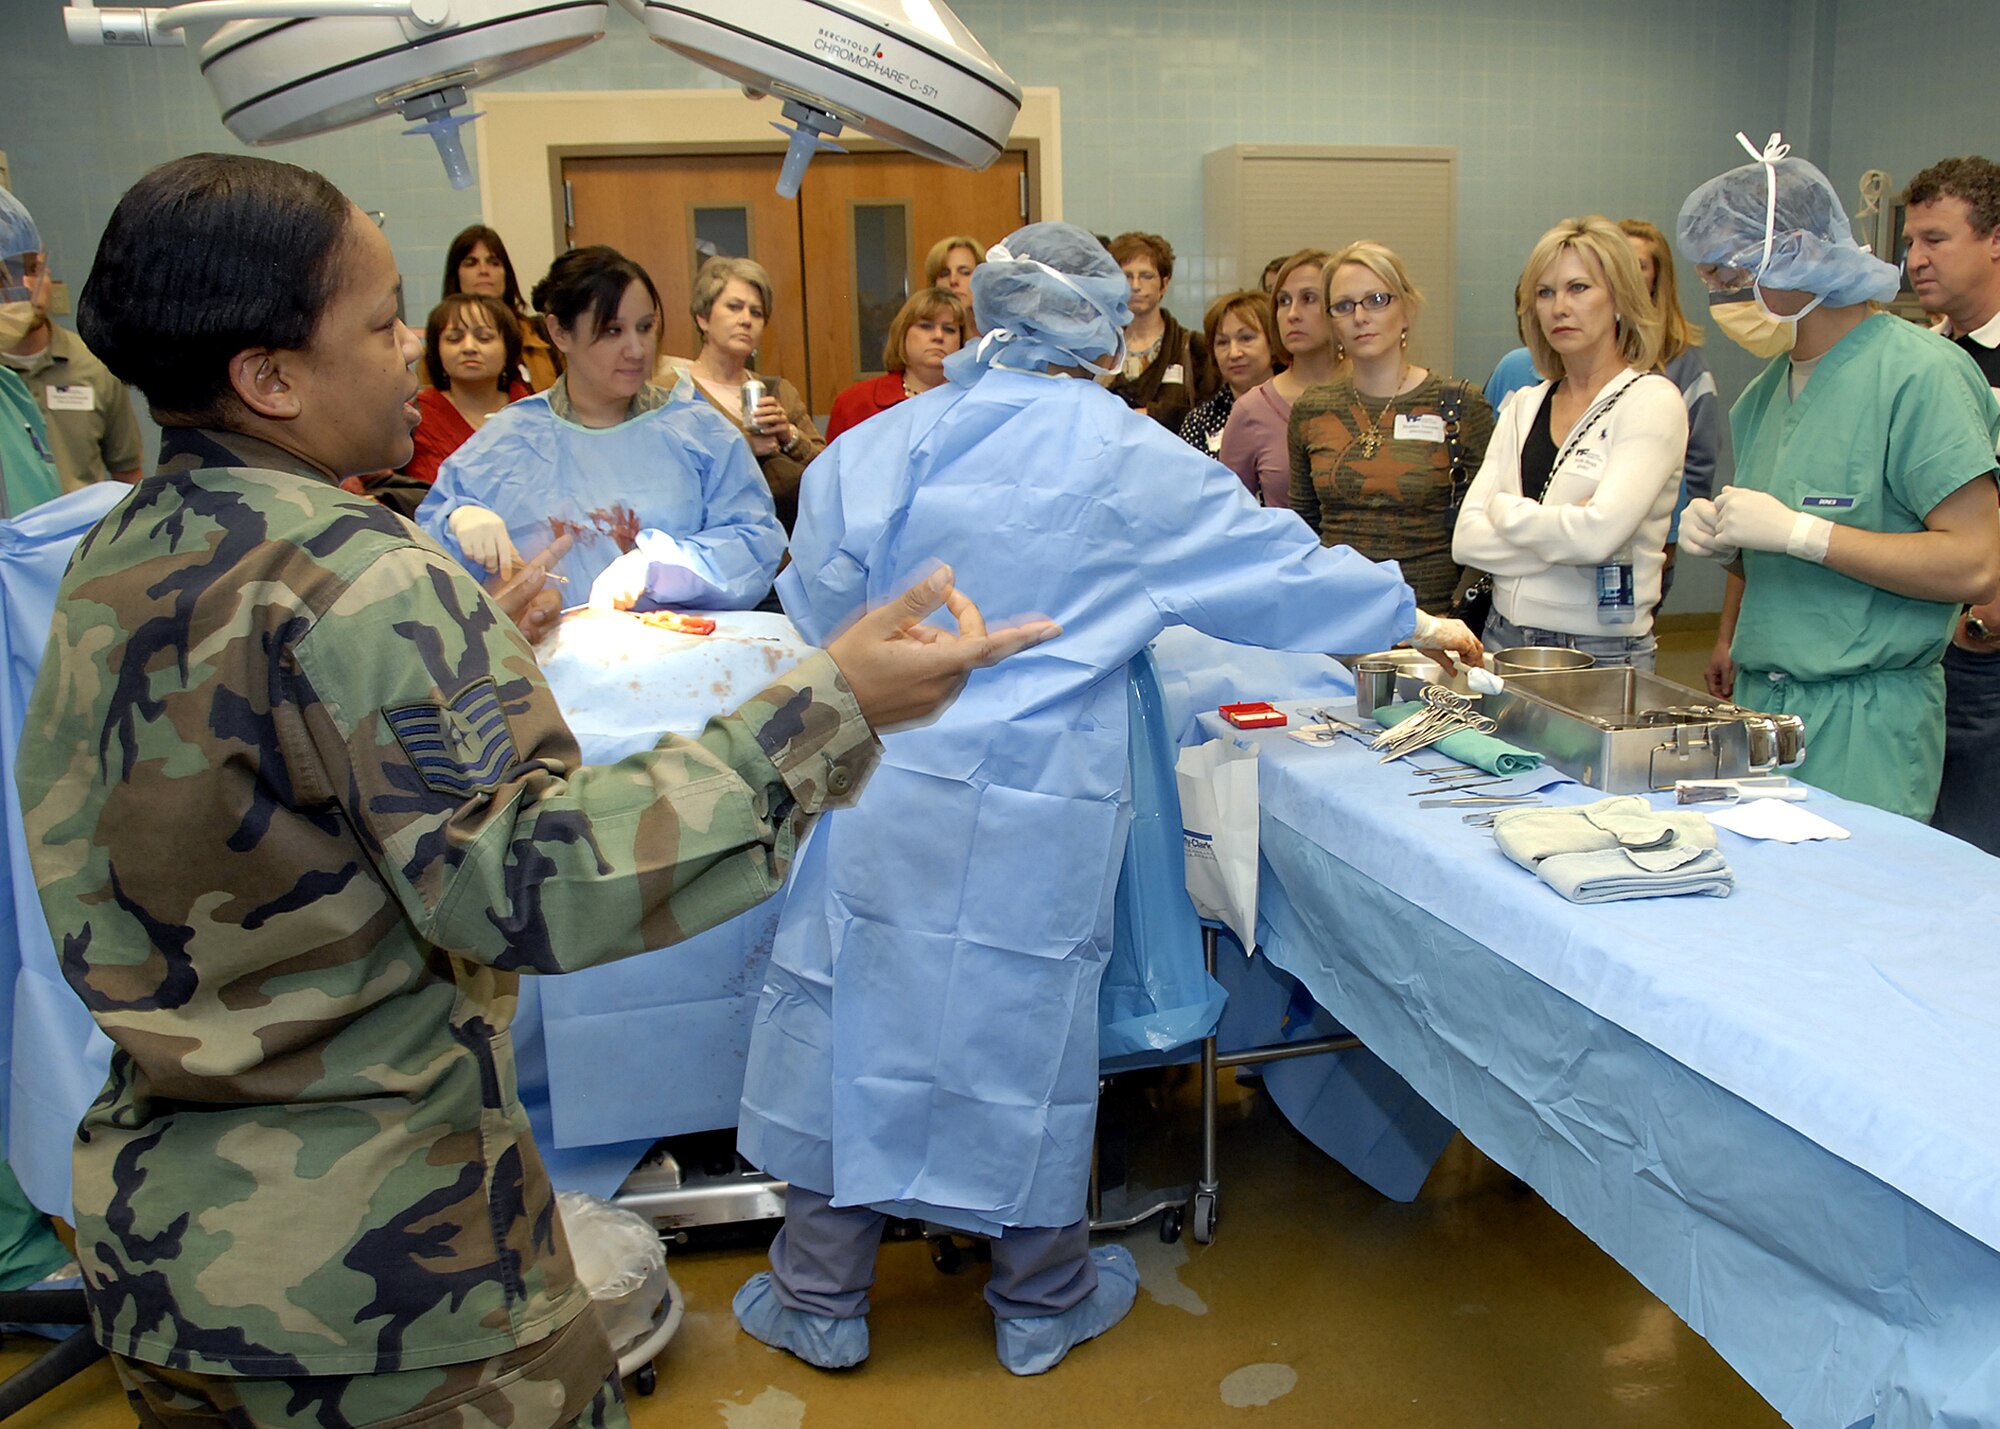 Tech. Sgt Tiwanda Sykes, 882nd Training Group Instructor Supervisor of the Surgical Services Apprentice Course, provides an overview of the Mock Surgical Ward to civic leaders during the annual Leadership Wichita Falls Economy Day at Sheppard. The 37 class members spent the morning learning about the mission and economic impact of the base.  After lunch at the dining facility, they toured the Heritage Center, Fifth Generation Maintenance Training, Medical Trianing, and the 80th FTW Simulators. (U.S. Air Force photo/Mike Litteken)